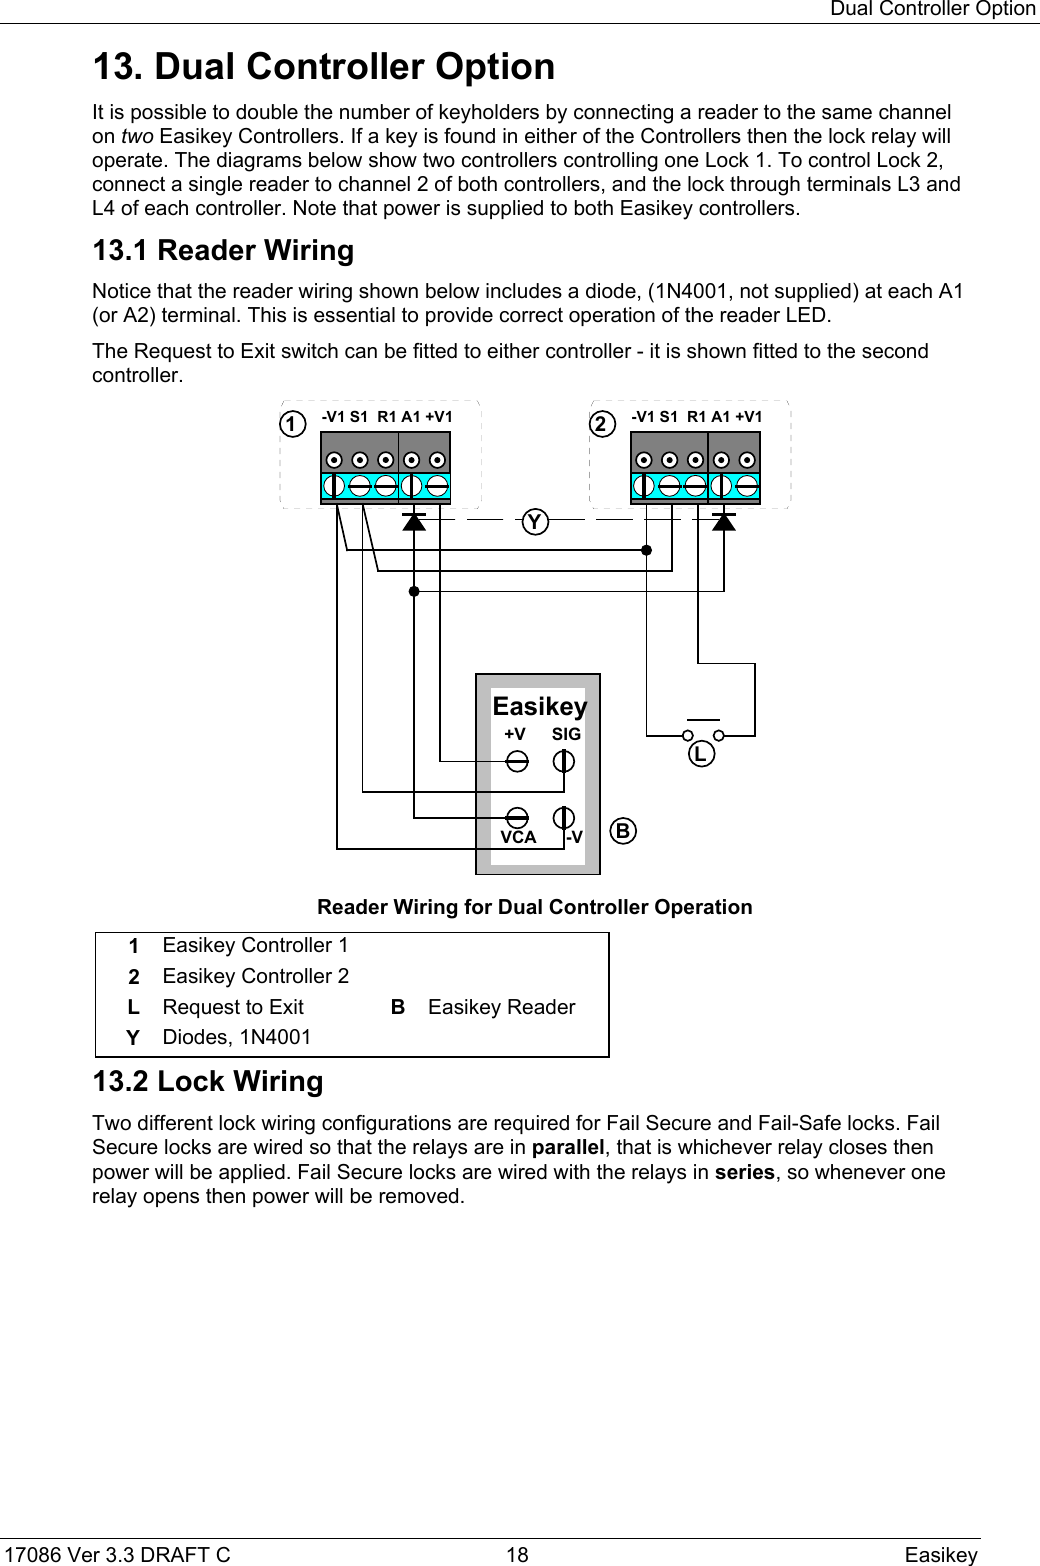 Dual Controller Option17086 Ver 3.3 DRAFT C  18 Easikey13. Dual Controller OptionIt is possible to double the number of keyholders by connecting a reader to the same channelon two Easikey Controllers. If a key is found in either of the Controllers then the lock relay willoperate. The diagrams below show two controllers controlling one Lock 1. To control Lock 2,connect a single reader to channel 2 of both controllers, and the lock through terminals L3 andL4 of each controller. Note that power is supplied to both Easikey controllers.13.1 Reader WiringNotice that the reader wiring shown below includes a diode, (1N4001, not supplied) at each A1(or A2) terminal. This is essential to provide correct operation of the reader LED.The Request to Exit switch can be fitted to either controller - it is shown fitted to the secondcontroller. -V1 S1  R1 A1 +V1+V SIGVCA -VEasikey -V1 S1  R1 A1 +V112LBYReader Wiring for Dual Controller Operation1Easikey Controller 12Easikey Controller 2LRequest to Exit BEasikey ReaderYDiodes, 1N400113.2 Lock WiringTwo different lock wiring configurations are required for Fail Secure and Fail-Safe locks. FailSecure locks are wired so that the relays are in parallel, that is whichever relay closes thenpower will be applied. Fail Secure locks are wired with the relays in series, so whenever onerelay opens then power will be removed.